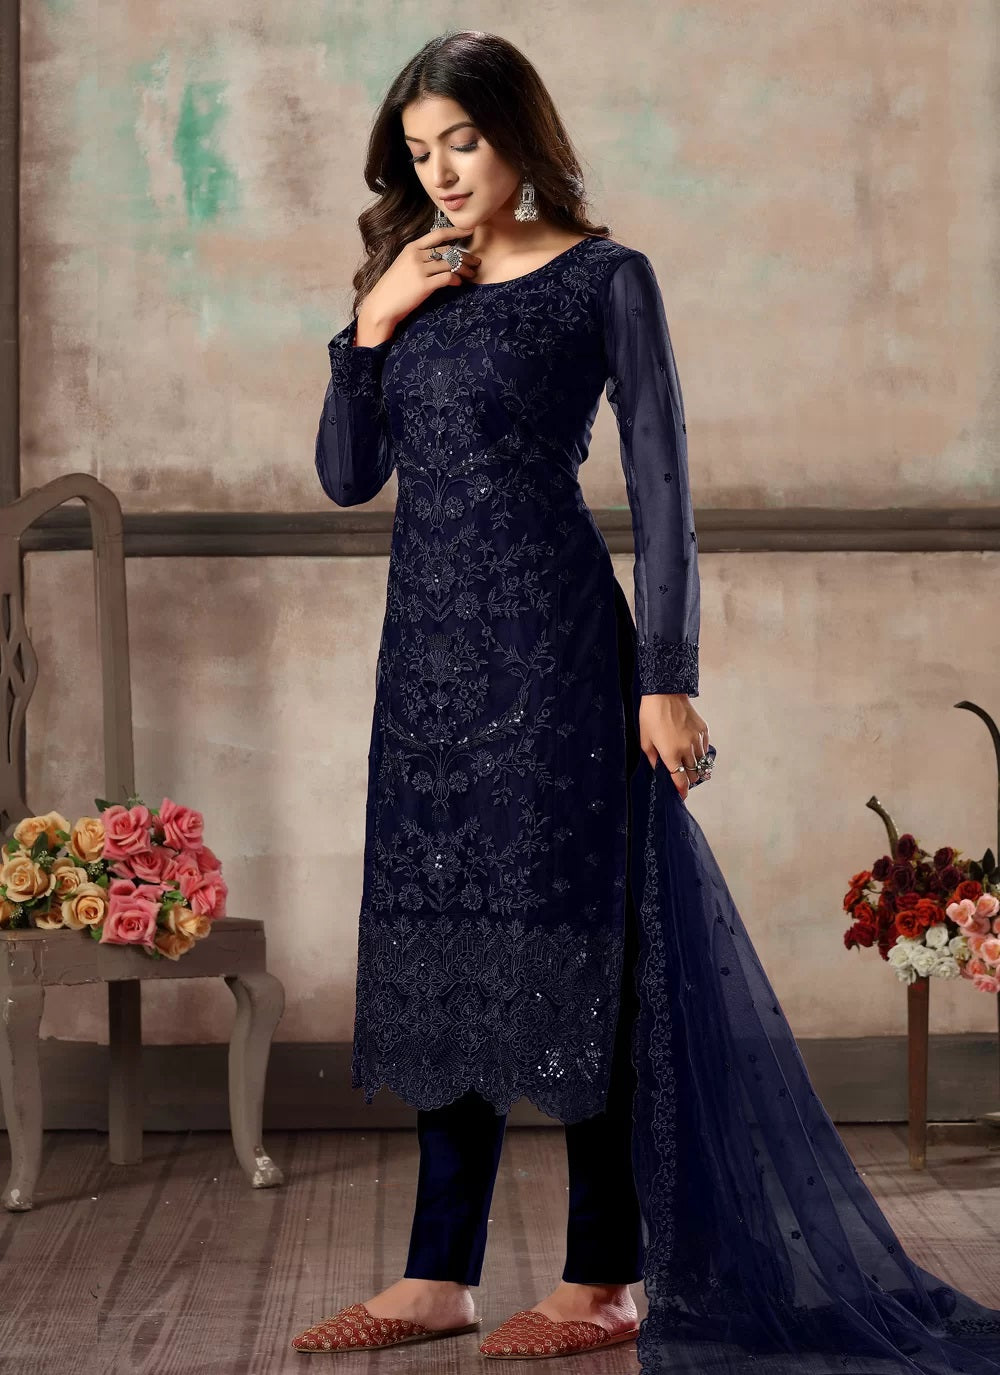 Hand Embroidered Cotton Silk Pakistani Suit in Royal Blue : KJN4329